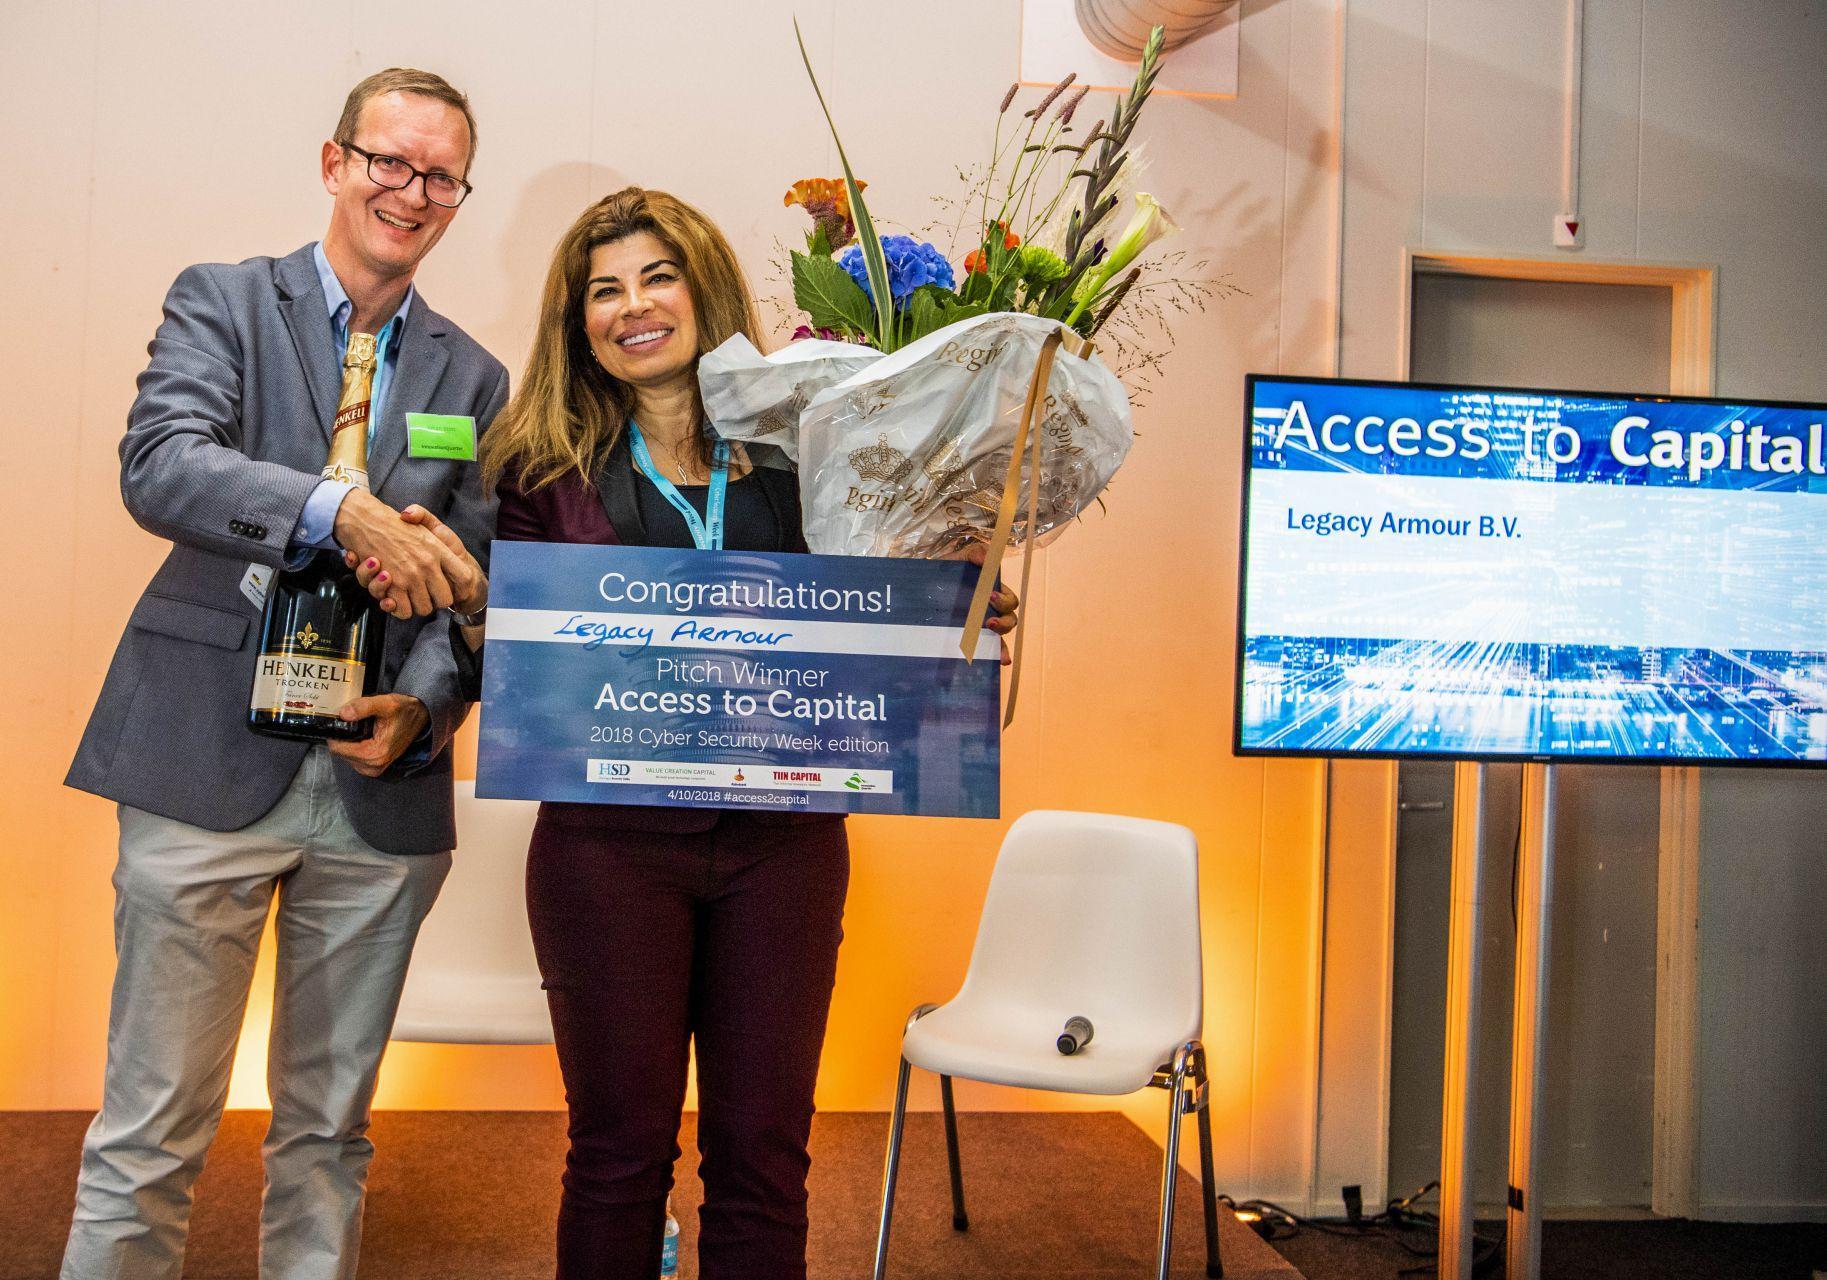 Access to Capital Event Leads to Exciting Opportunities